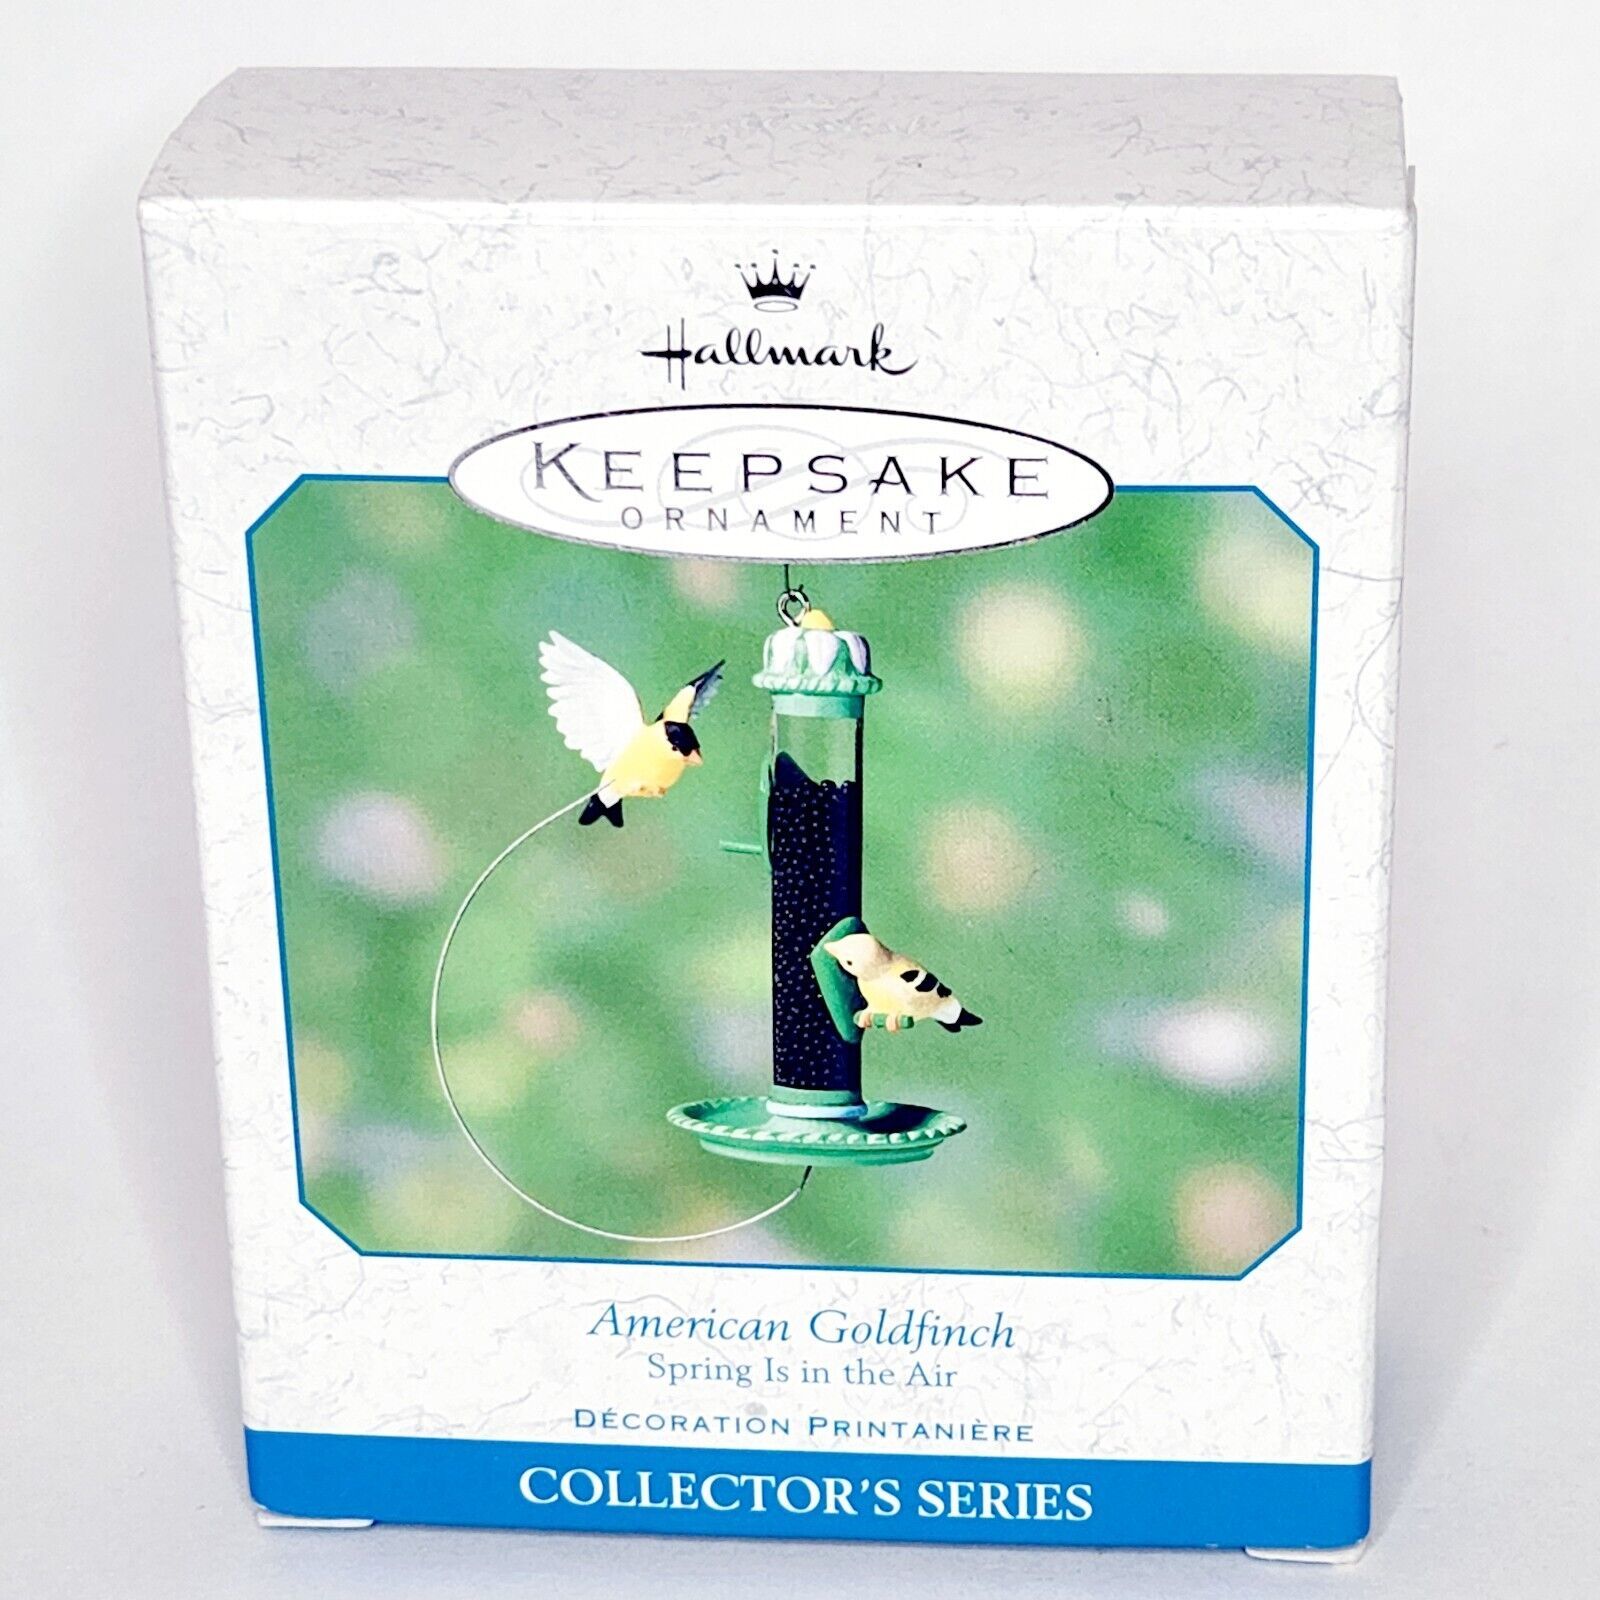 Primary image for Hallmark Keepsake Ornament Spring Is In the Air American Goldfinch 2001